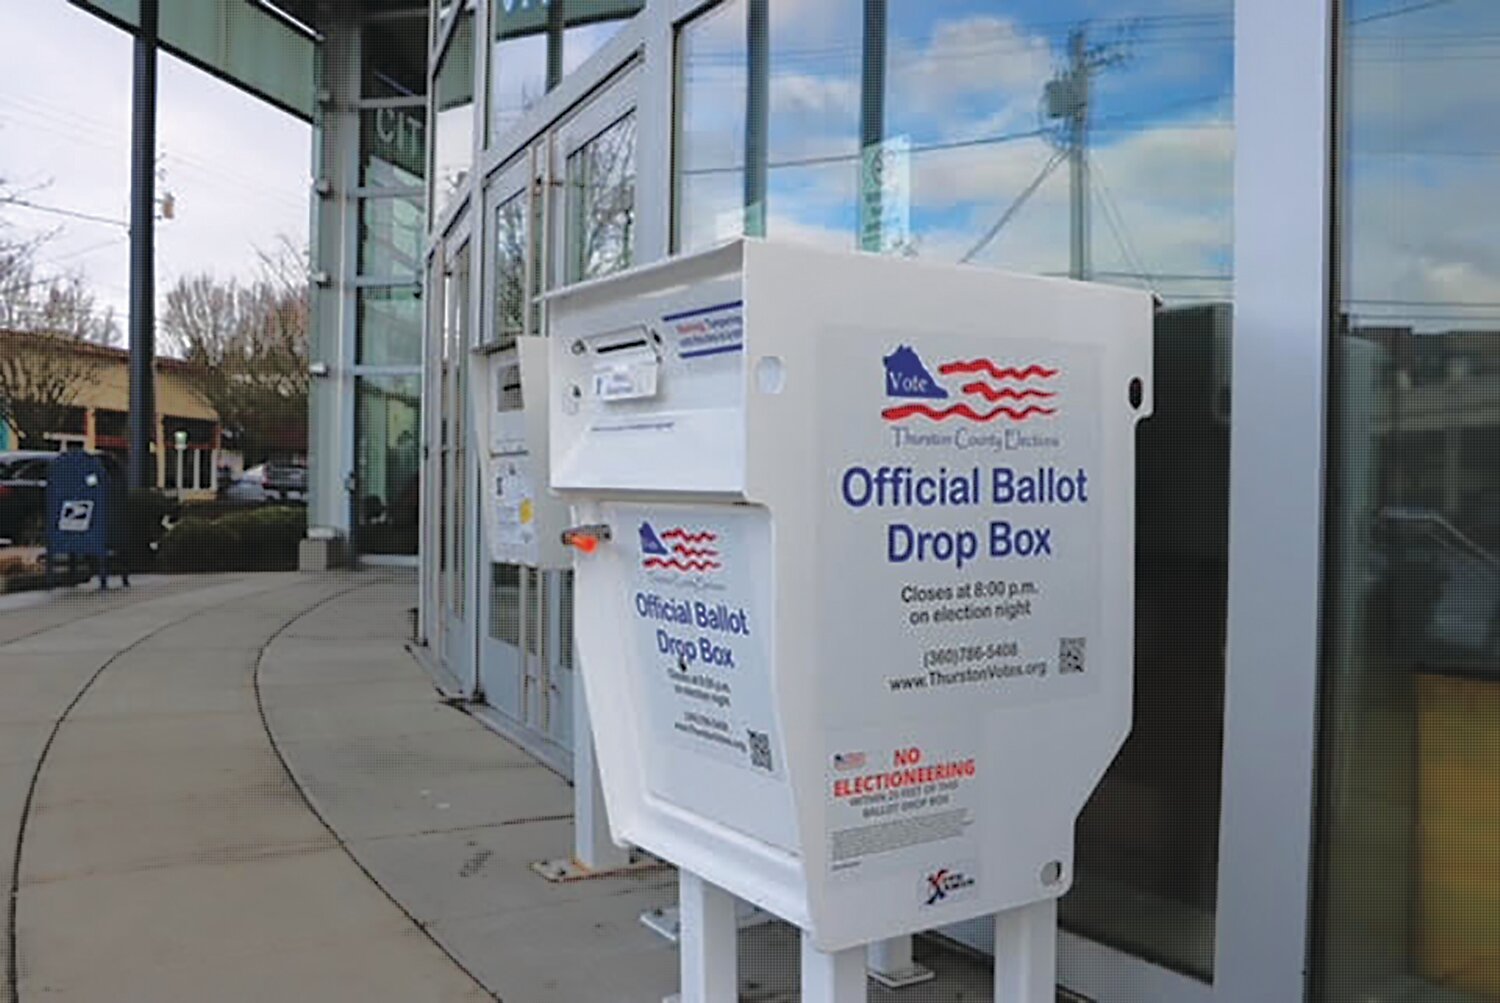 Low voter turnout in Thurston County in last year's general election was noted during discussion by state legislators to make voting mandatory in the state.